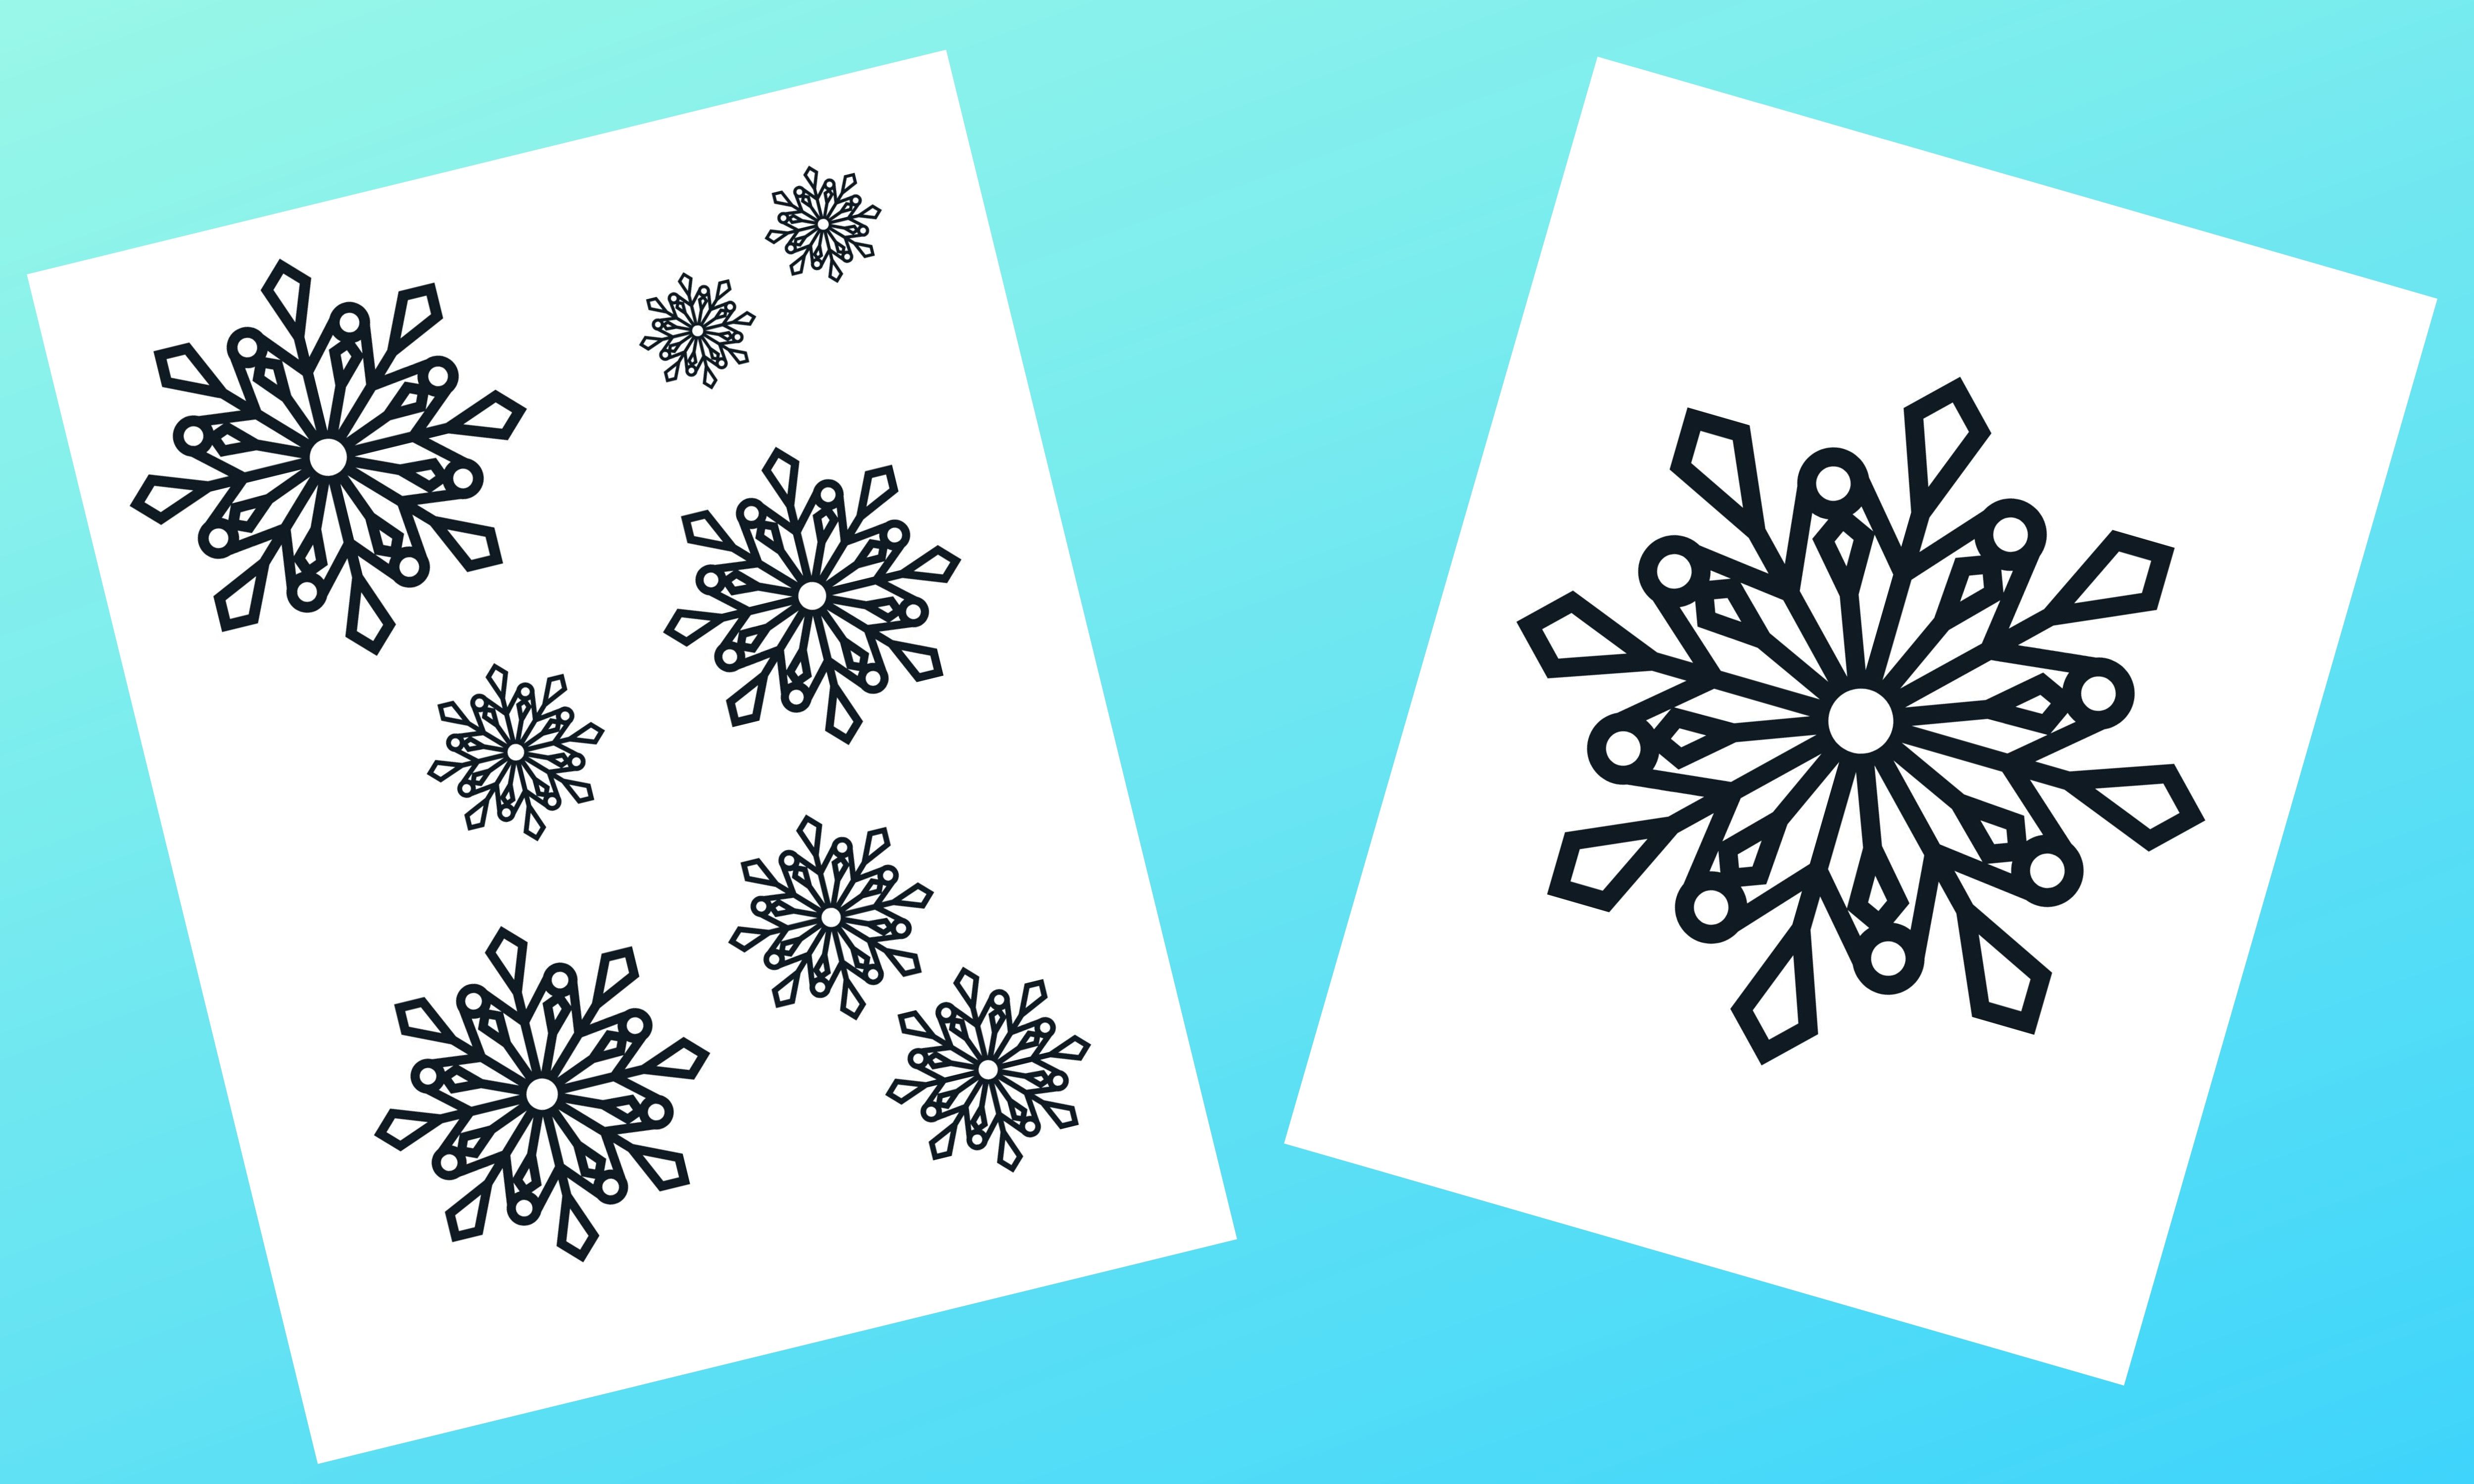 small and large snowflakes